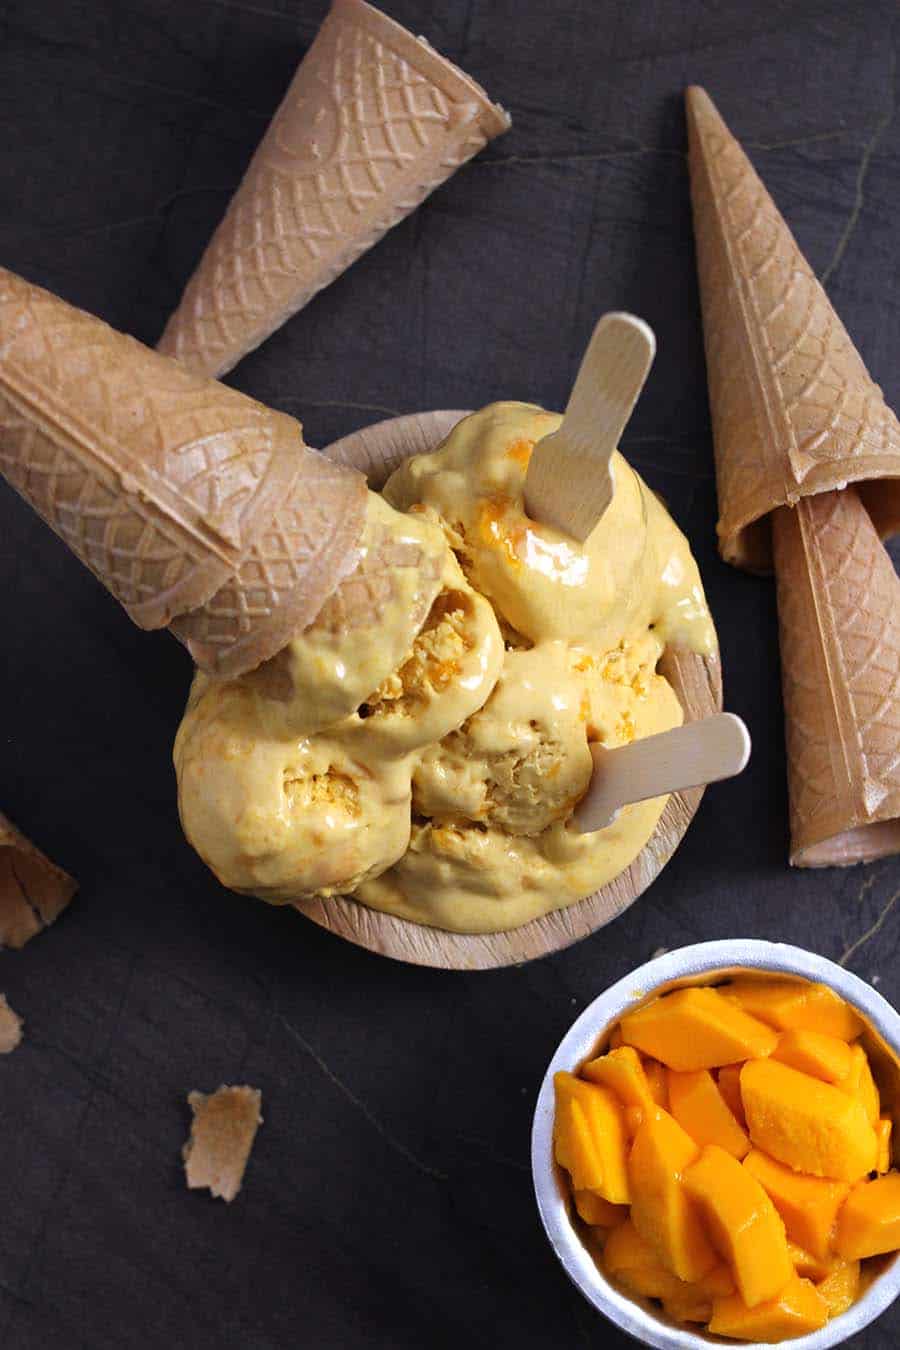 Homemade Mango Ice Cream | How to Make Mango Ice Cream, no churn ice cream, mexican mango ice cream, summer food recipes, summer desserts, no cooking recipes, best ice cream, mango coconut ice cream, mango recipes, fasting , upvas, vrat food, mango sorbet, no ice cream maker, mango mochi #icecream #mango #eggless #Nochurn #summerrecipes #indiansweets #indiandesserts